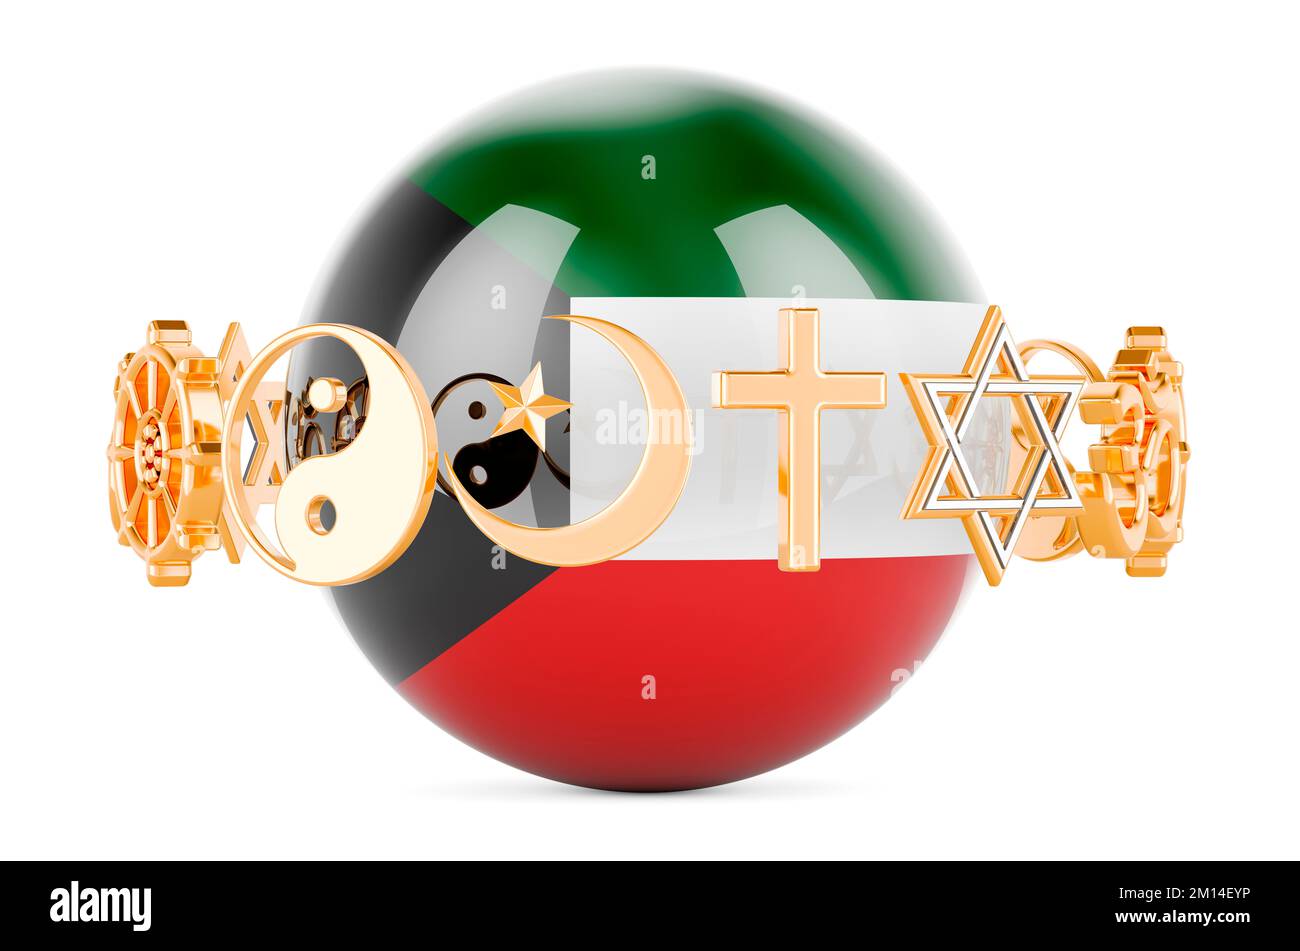 Kuwaiti flag painted on sphere with religions symbols around, 3D rendering isolated on white background Stock Photo